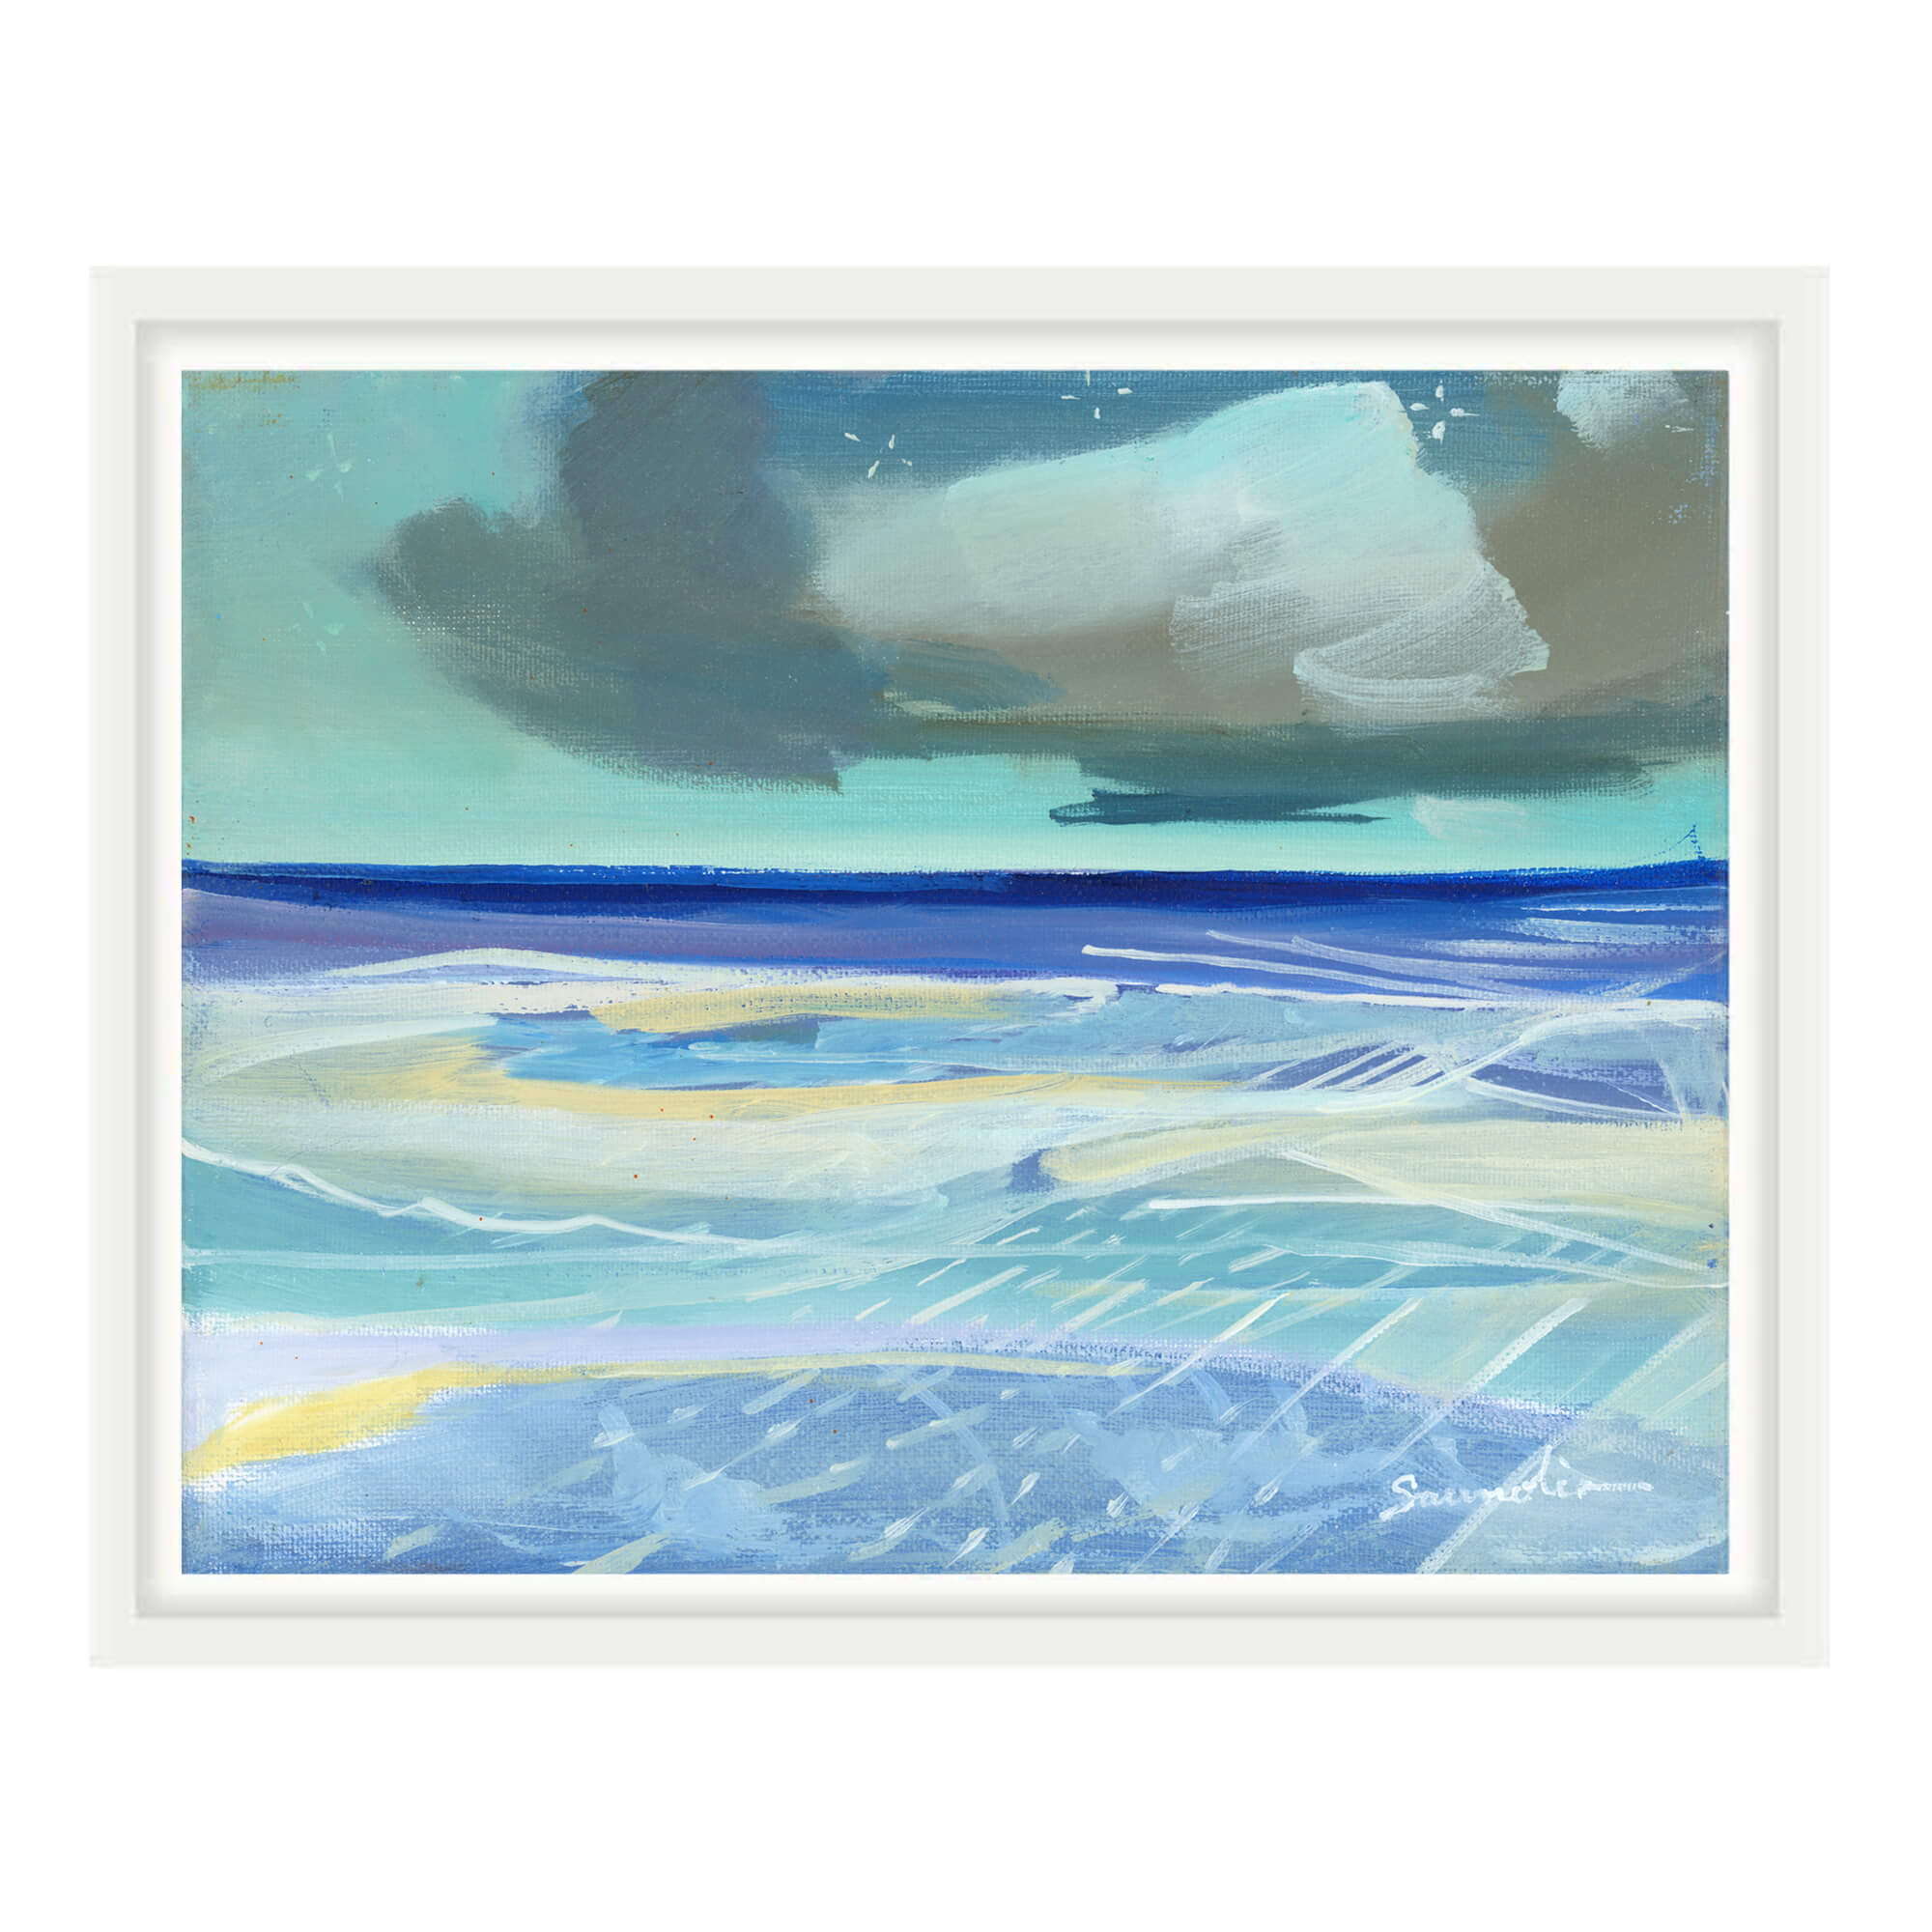 Vibrant blue with yellow touch seascape painting by Saumolia Puapuaga